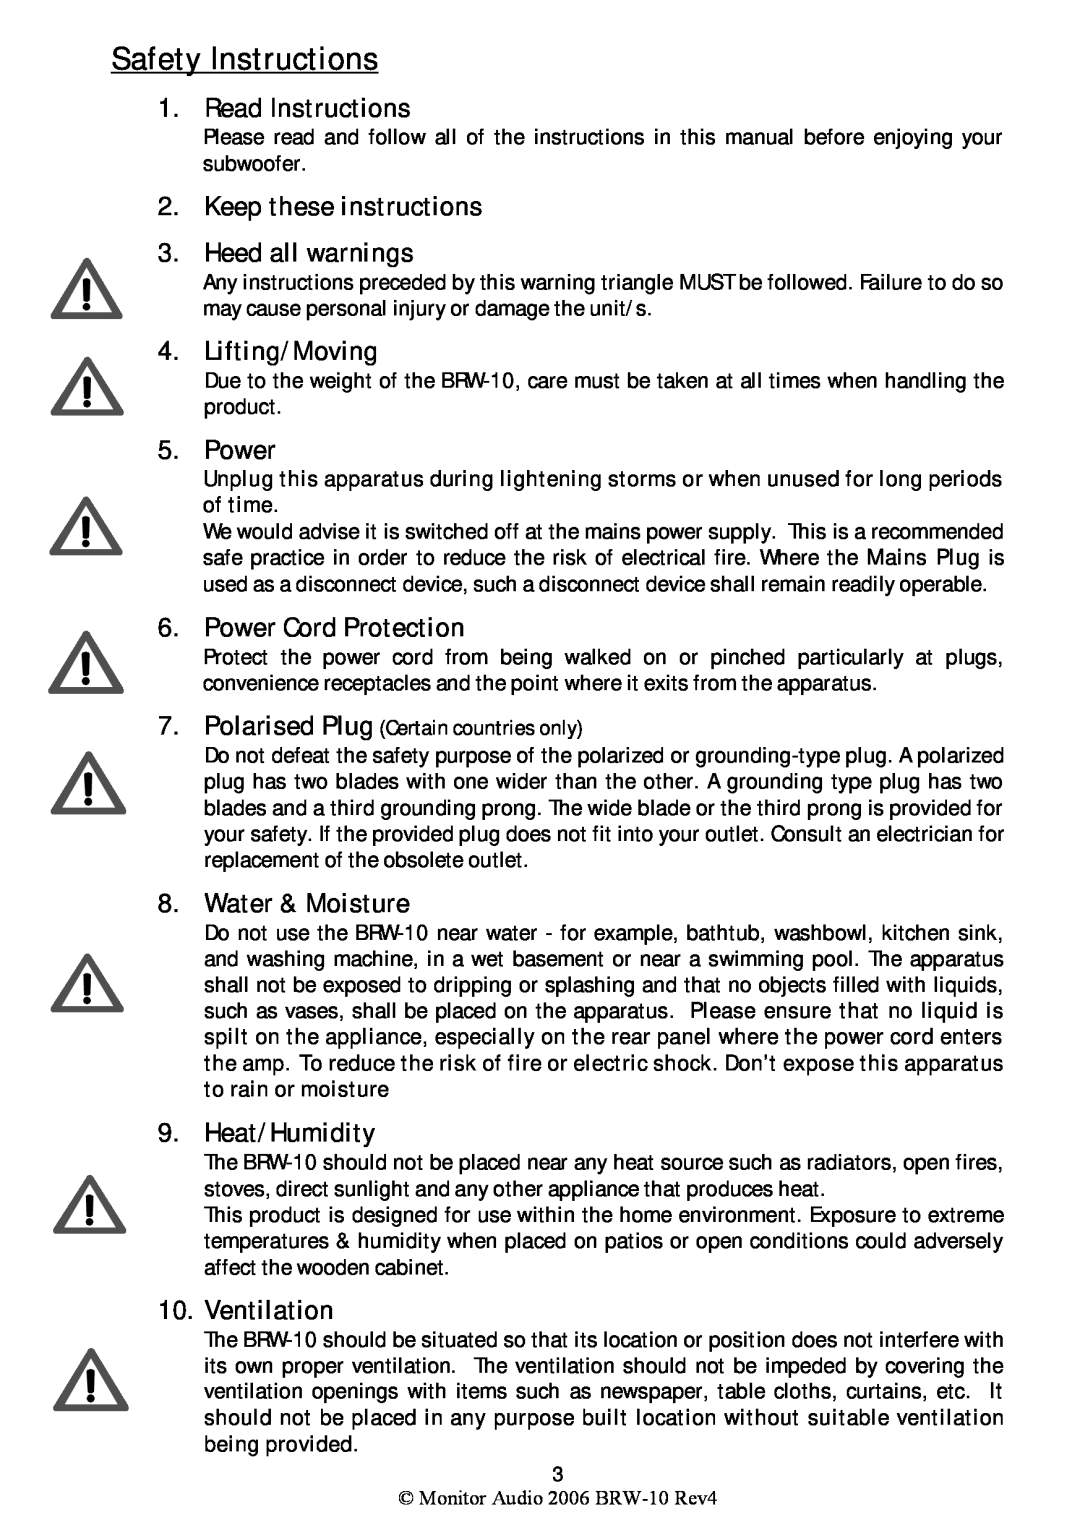 Monitor Audio BRW-10 Safety Instructions, Read Instructions, Keep these instructions 3.Heed all warnings, Lifting/Moving 